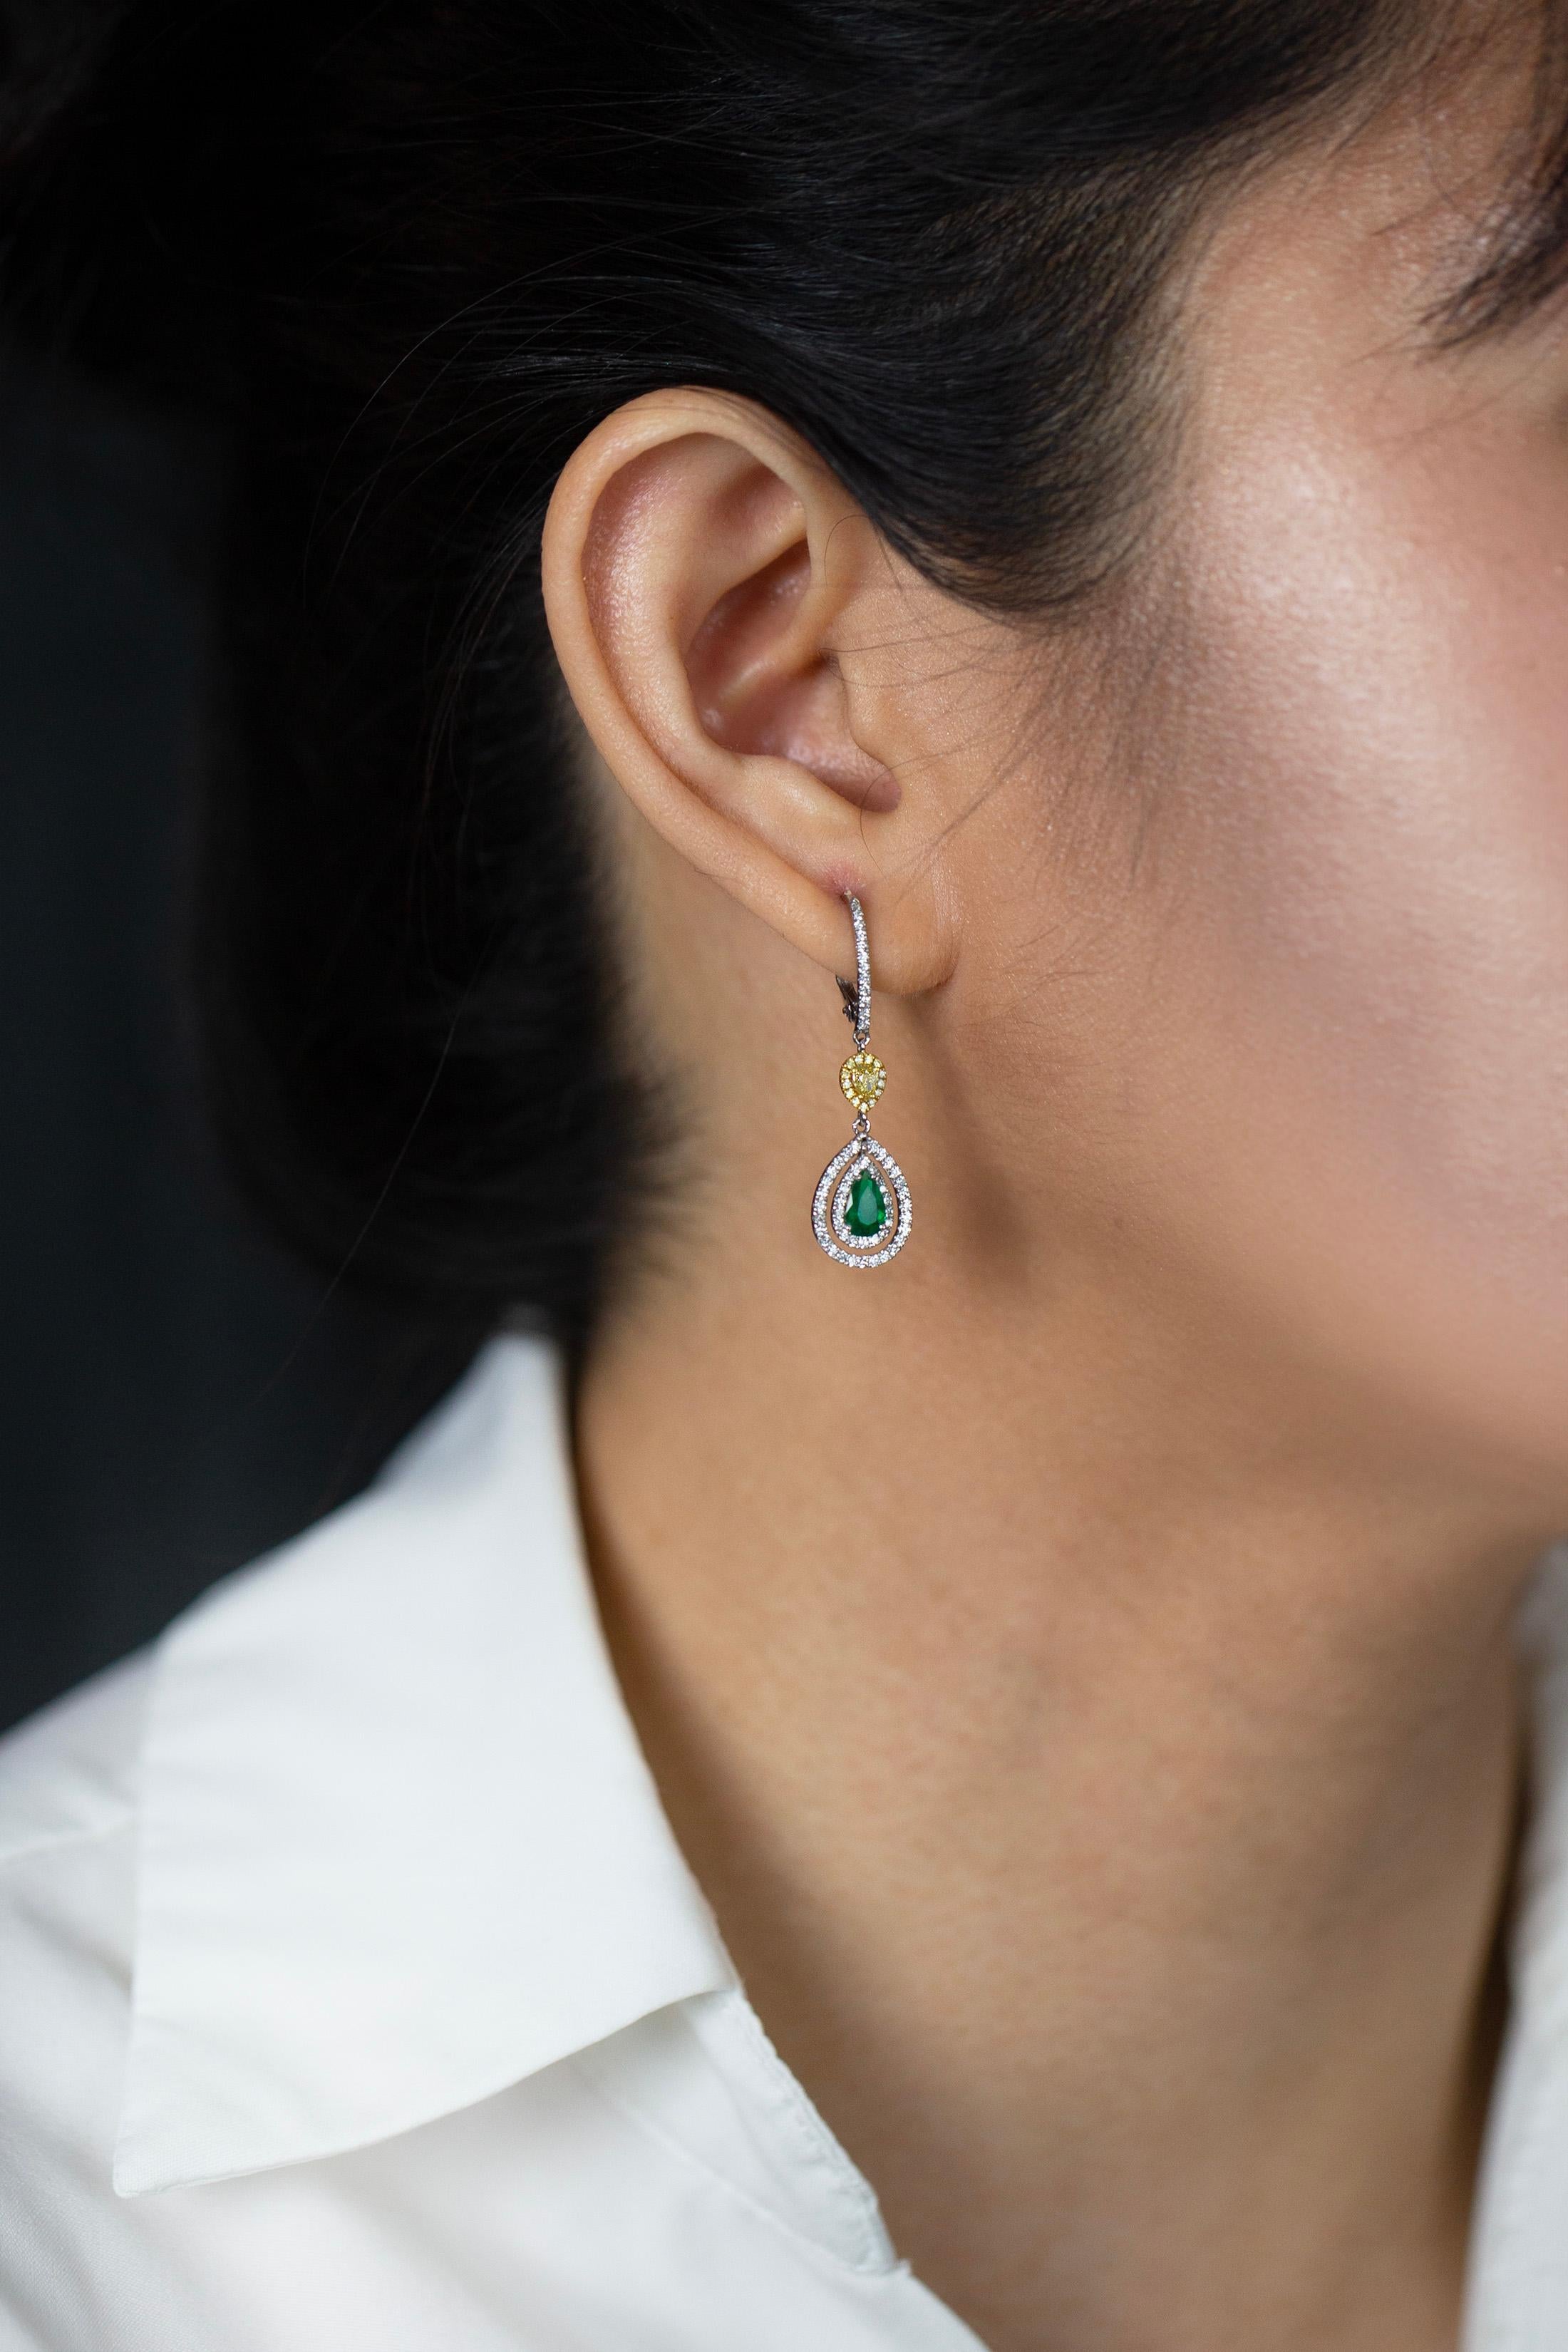 Showcasing an elegant dangle earrings set with 2 pear shape green emeralds weighing 0.69 carats total. The emeralds are surrounded by 2 rows of brilliant round diamonds and suspended on an accented lever-back weighing 0.57 carats total. Spaced by a